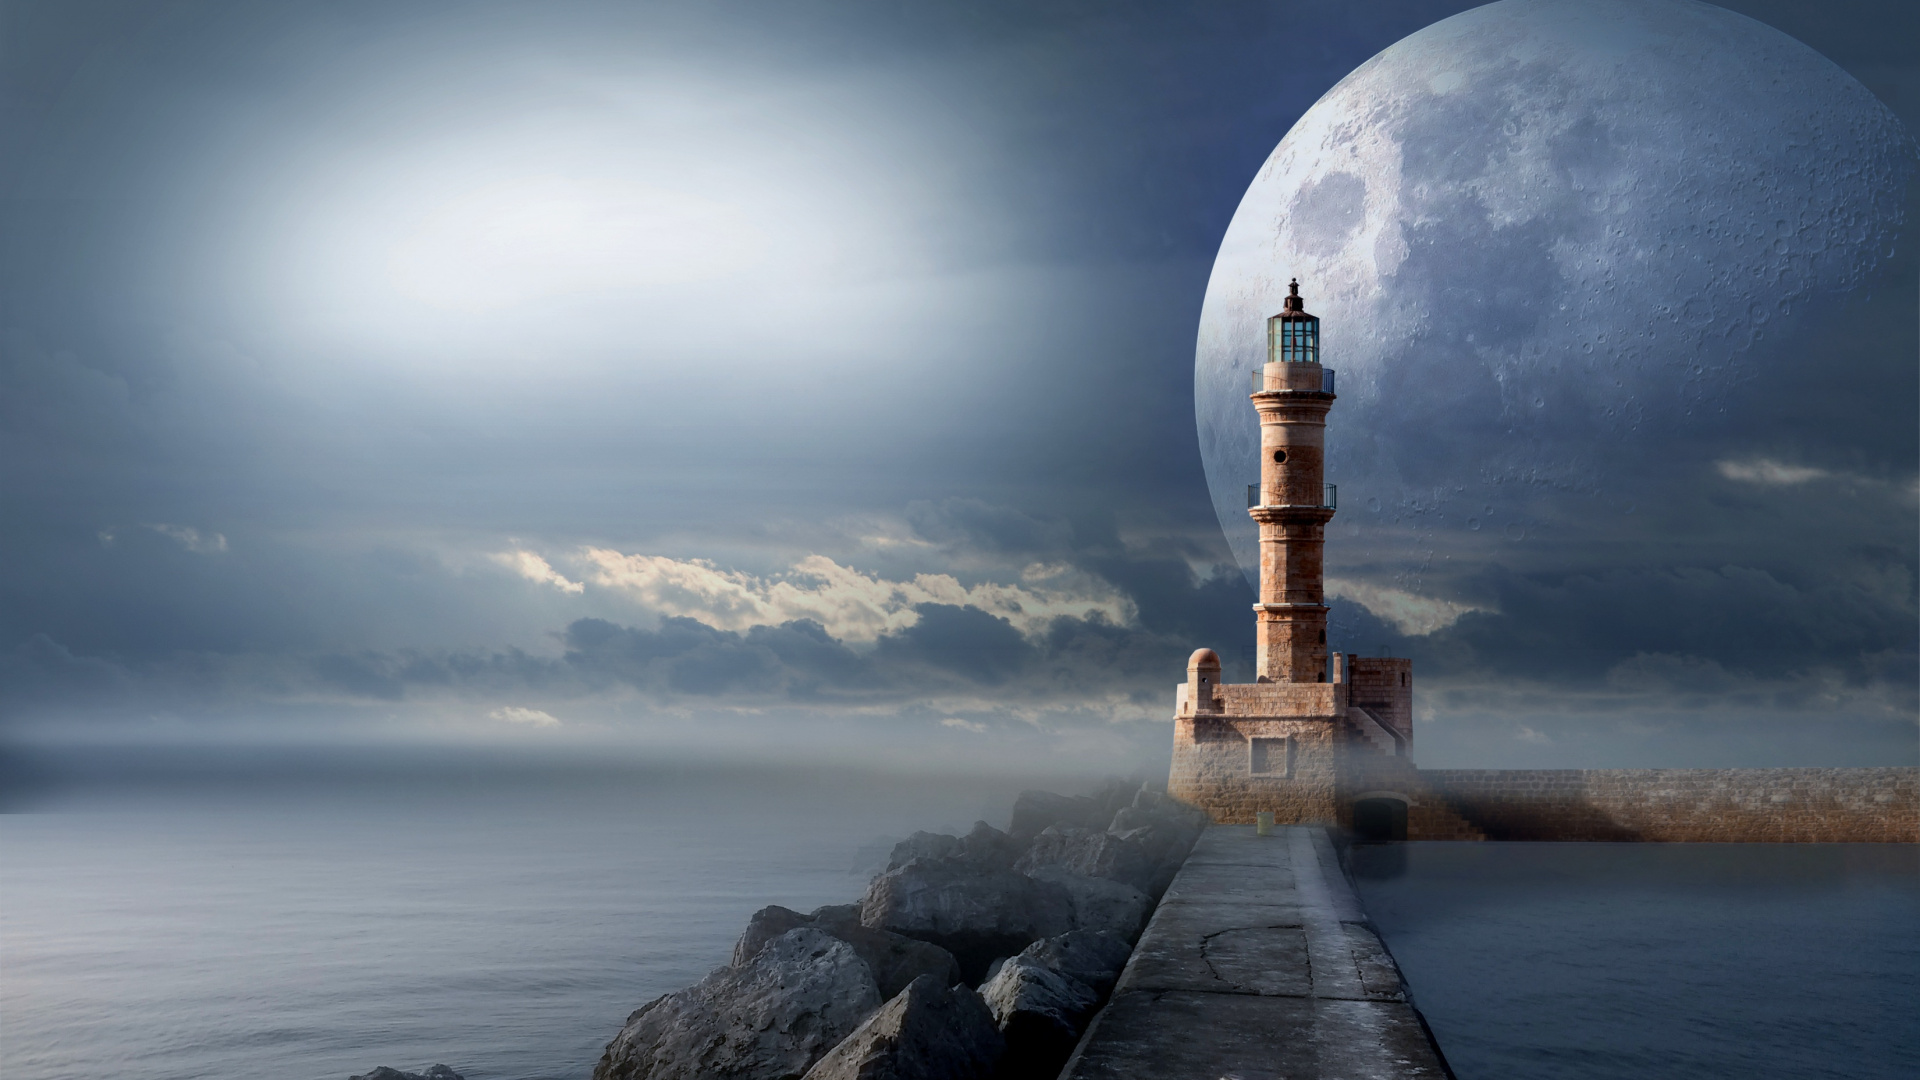 Brown Concrete Lighthouse Near Body of Water During Night Time. Wallpaper in 1920x1080 Resolution